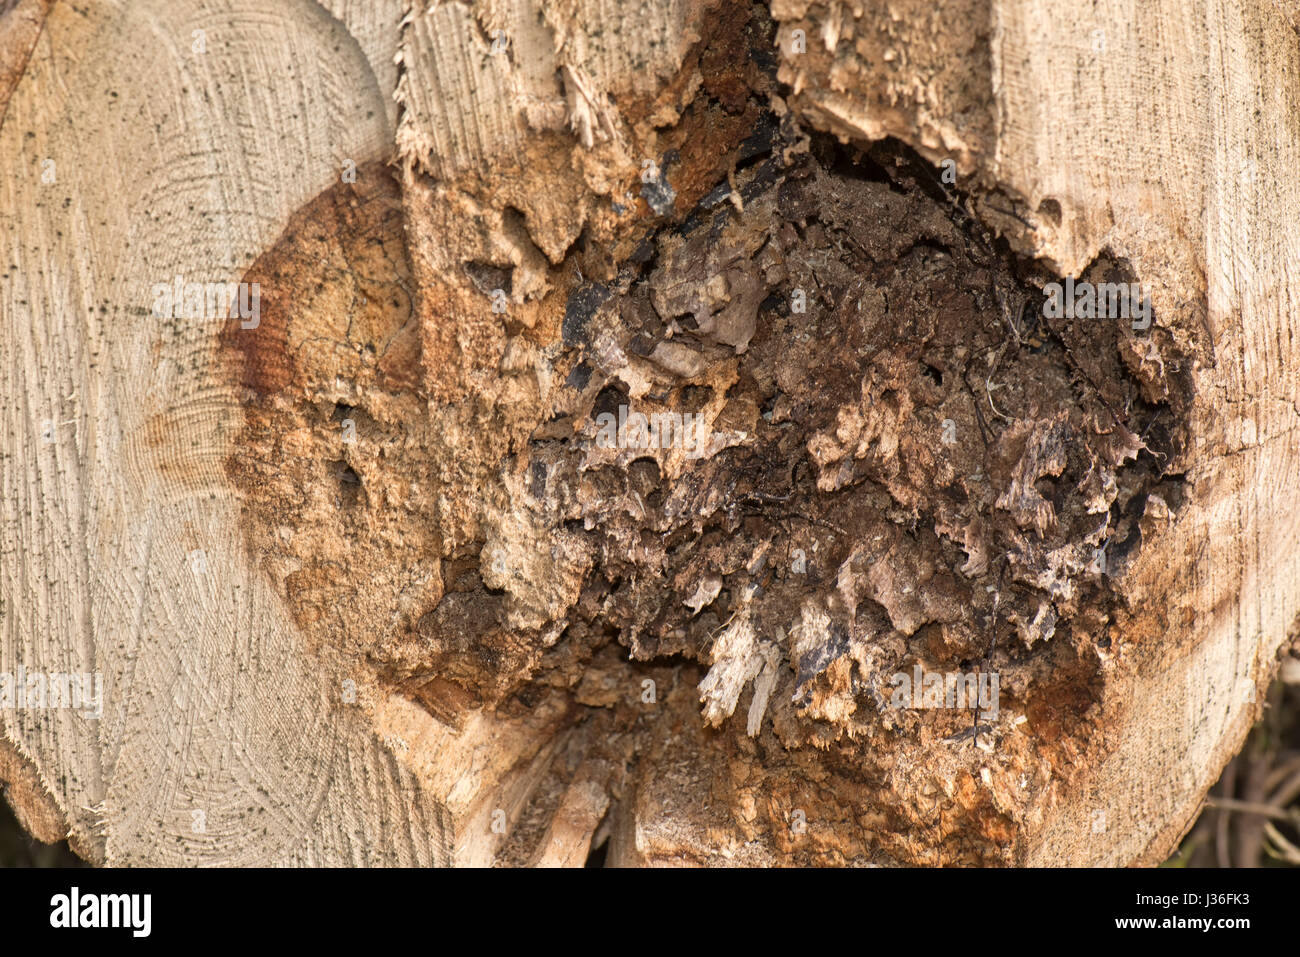 Black rhizomorphs or fungal cords of honey fungus, Armillaria mellea, formed on the diseased and dead core of a rotten tree, Berkshire, March Stock Photo